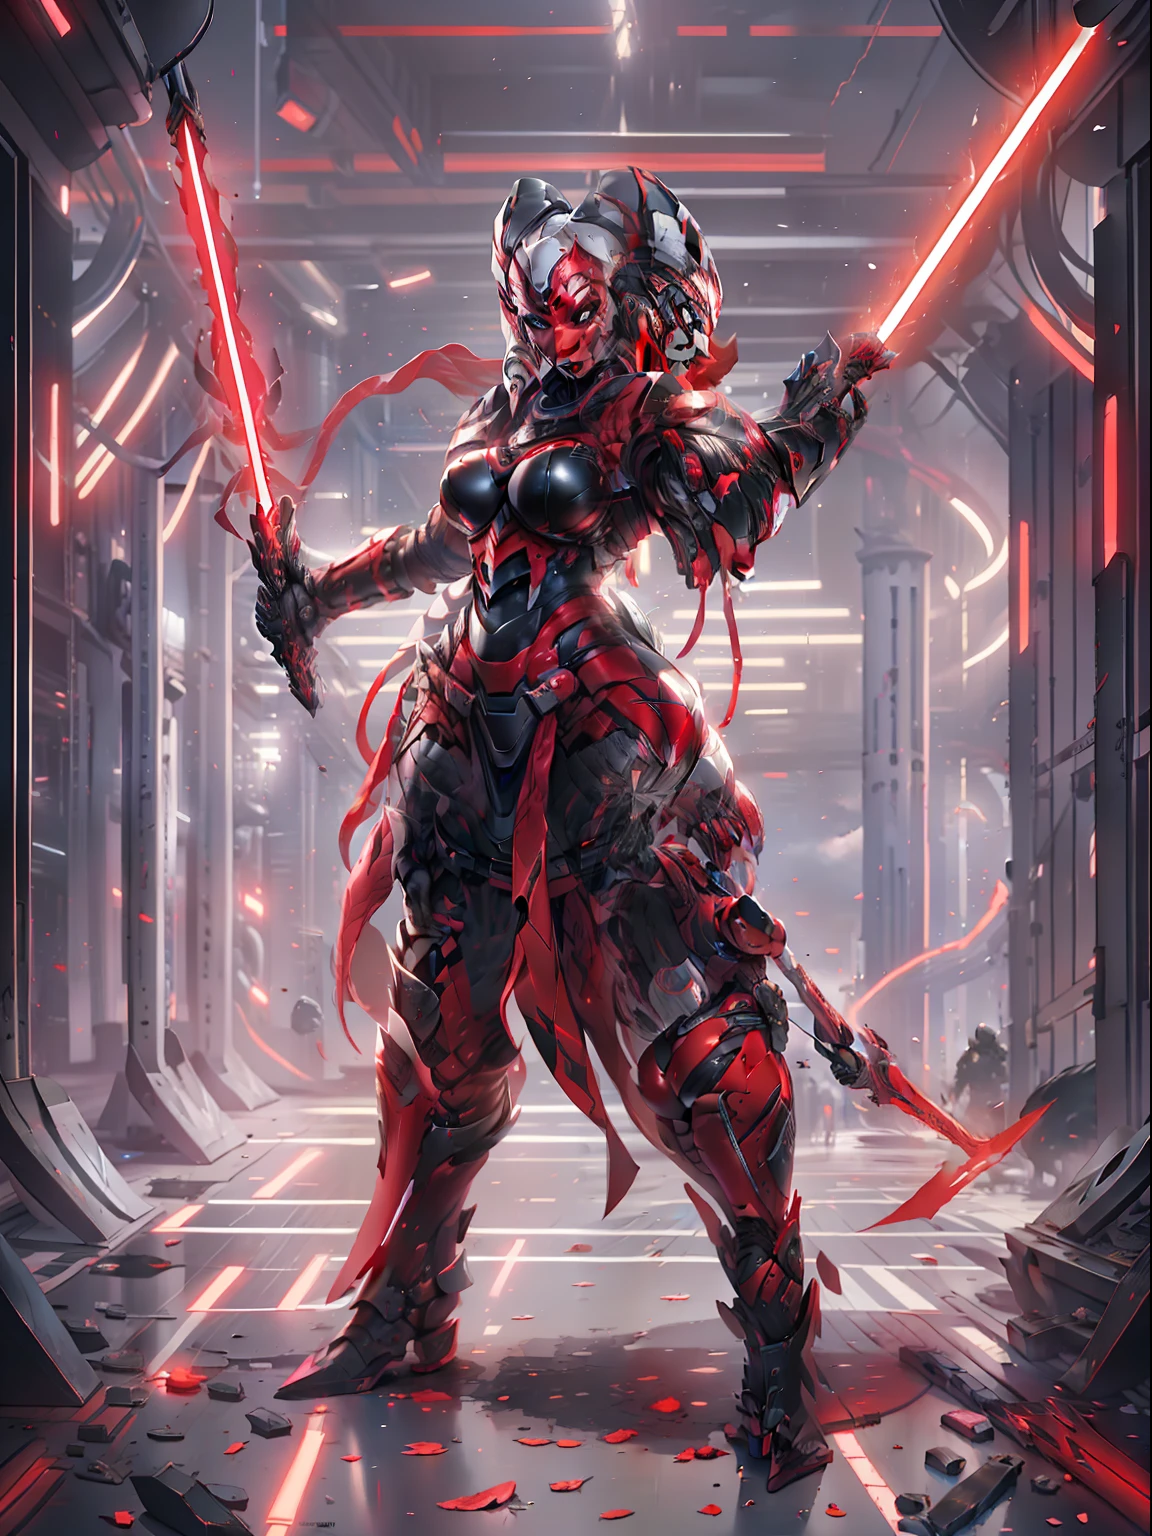 armored, red skin, Twi'lek, athletic, slender, busty, muscular, wearing heavy black stealth armor, evil space knight, space samurai, dual red lightsabers, Star Wars, armor